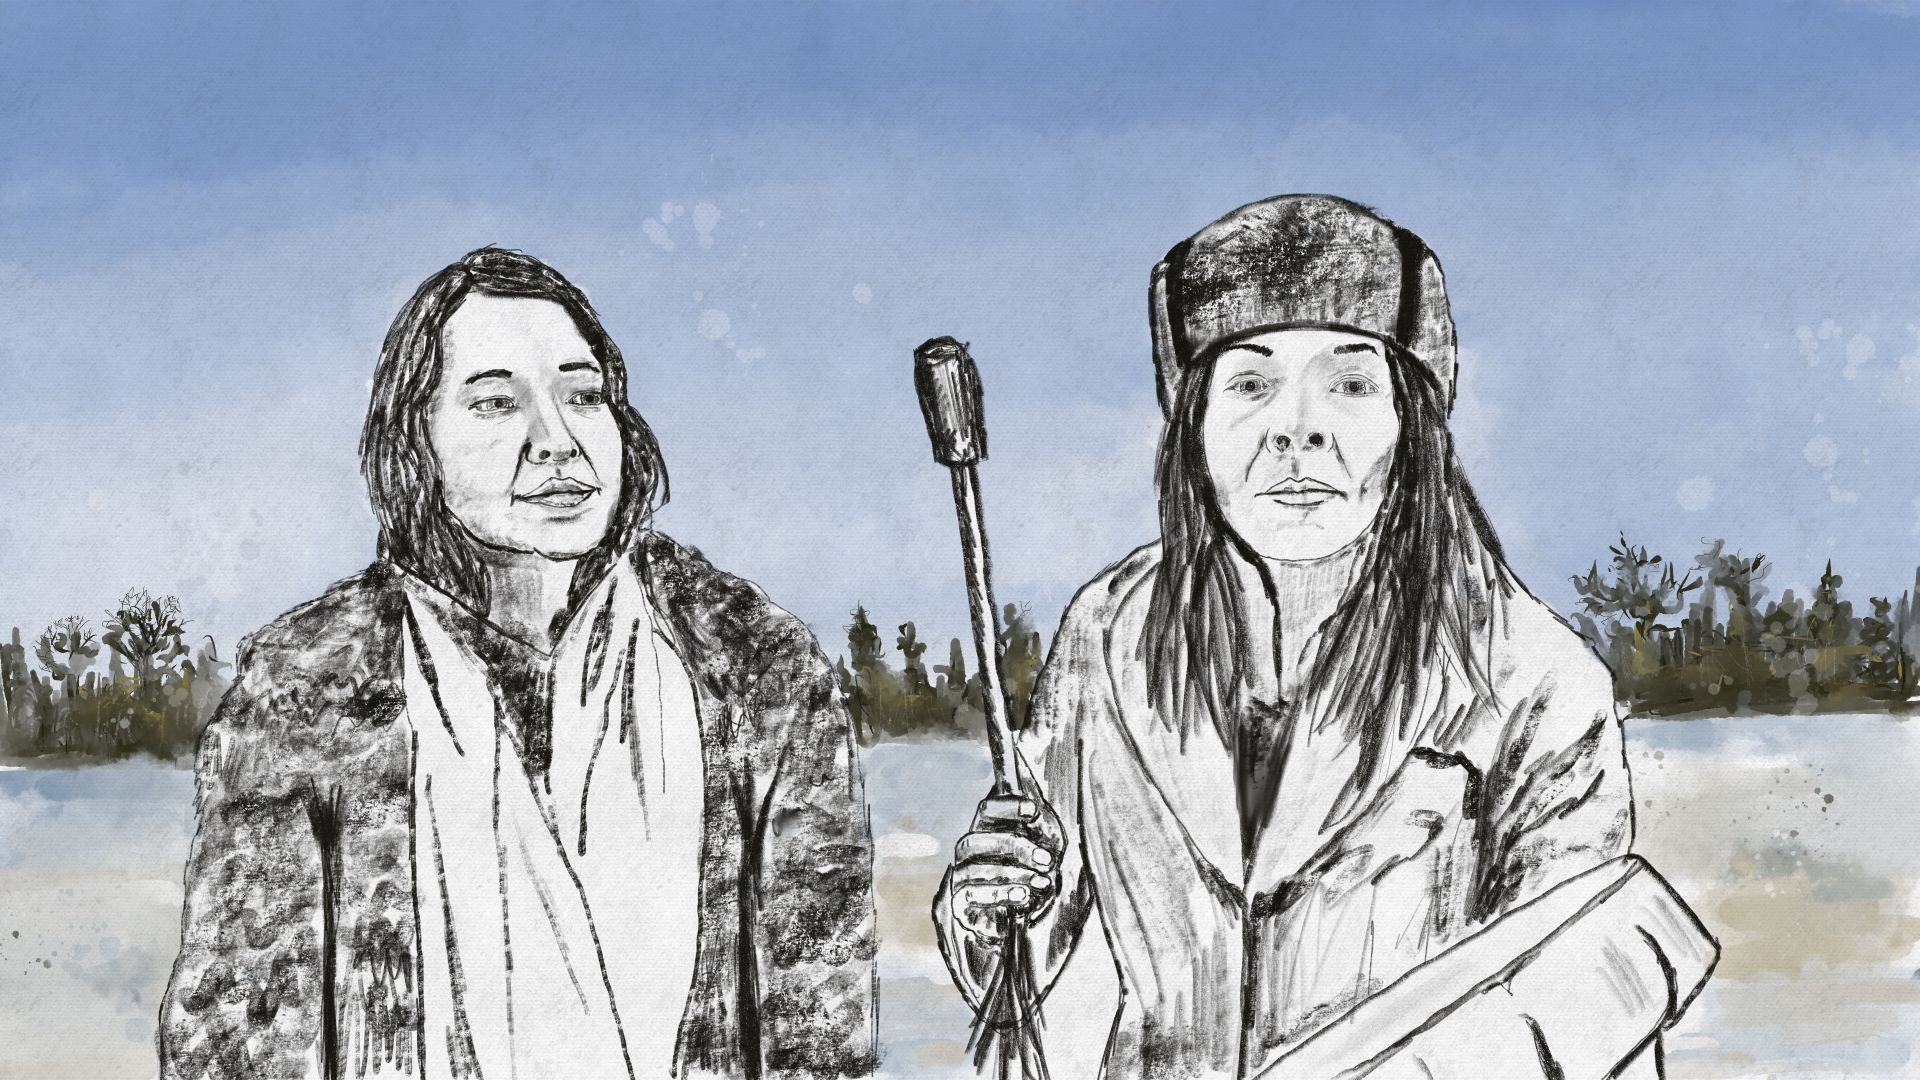 An illustration shows land defenders Sabina Dennis and her sister. Sabina is holding a frame drum. There are fir trees in the background and snow on the ground.